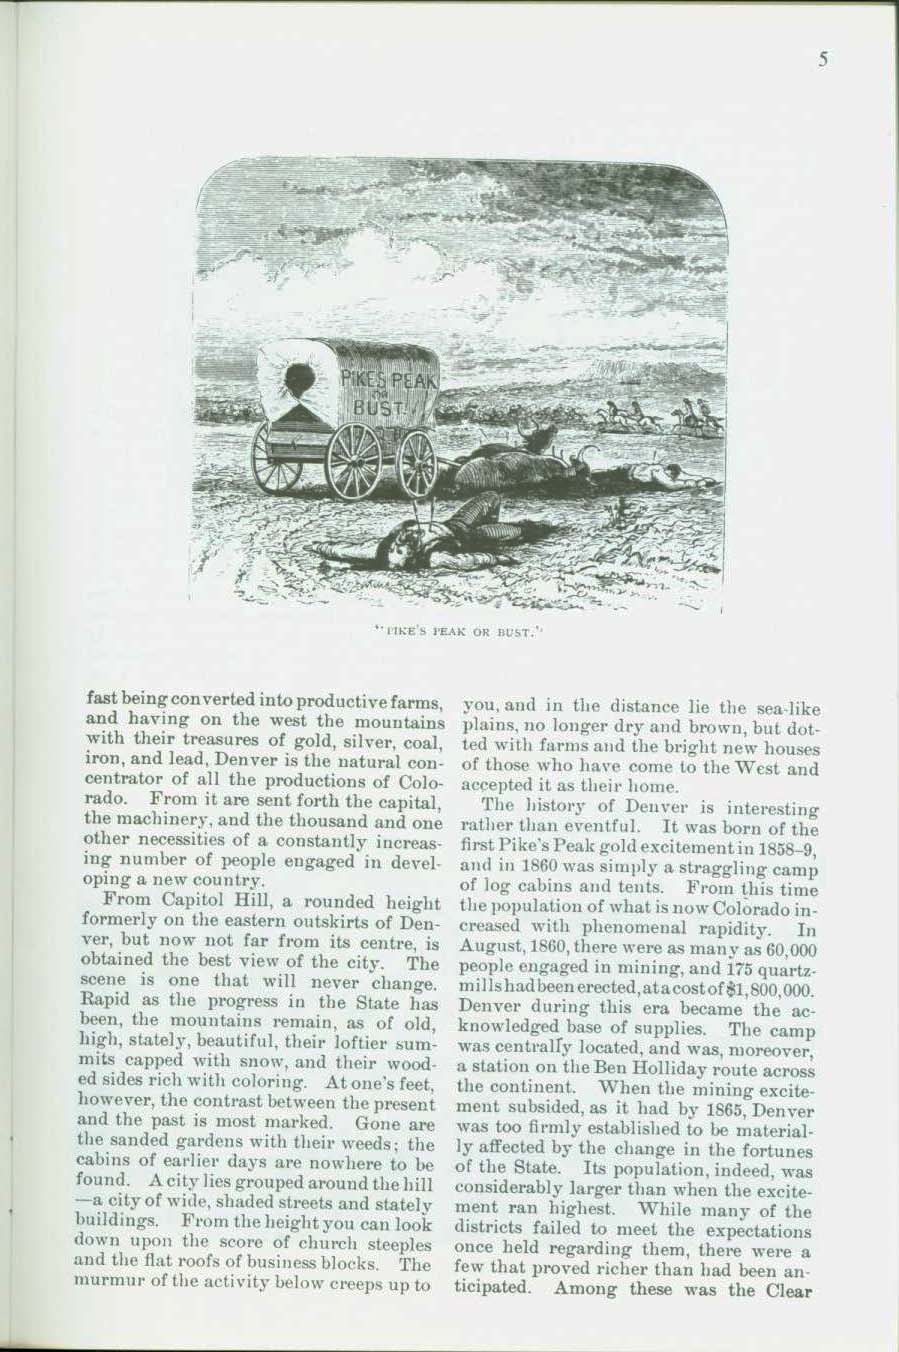 The City of Denver, 1888: an early history of "The Queen City of the Plains". vist0006d